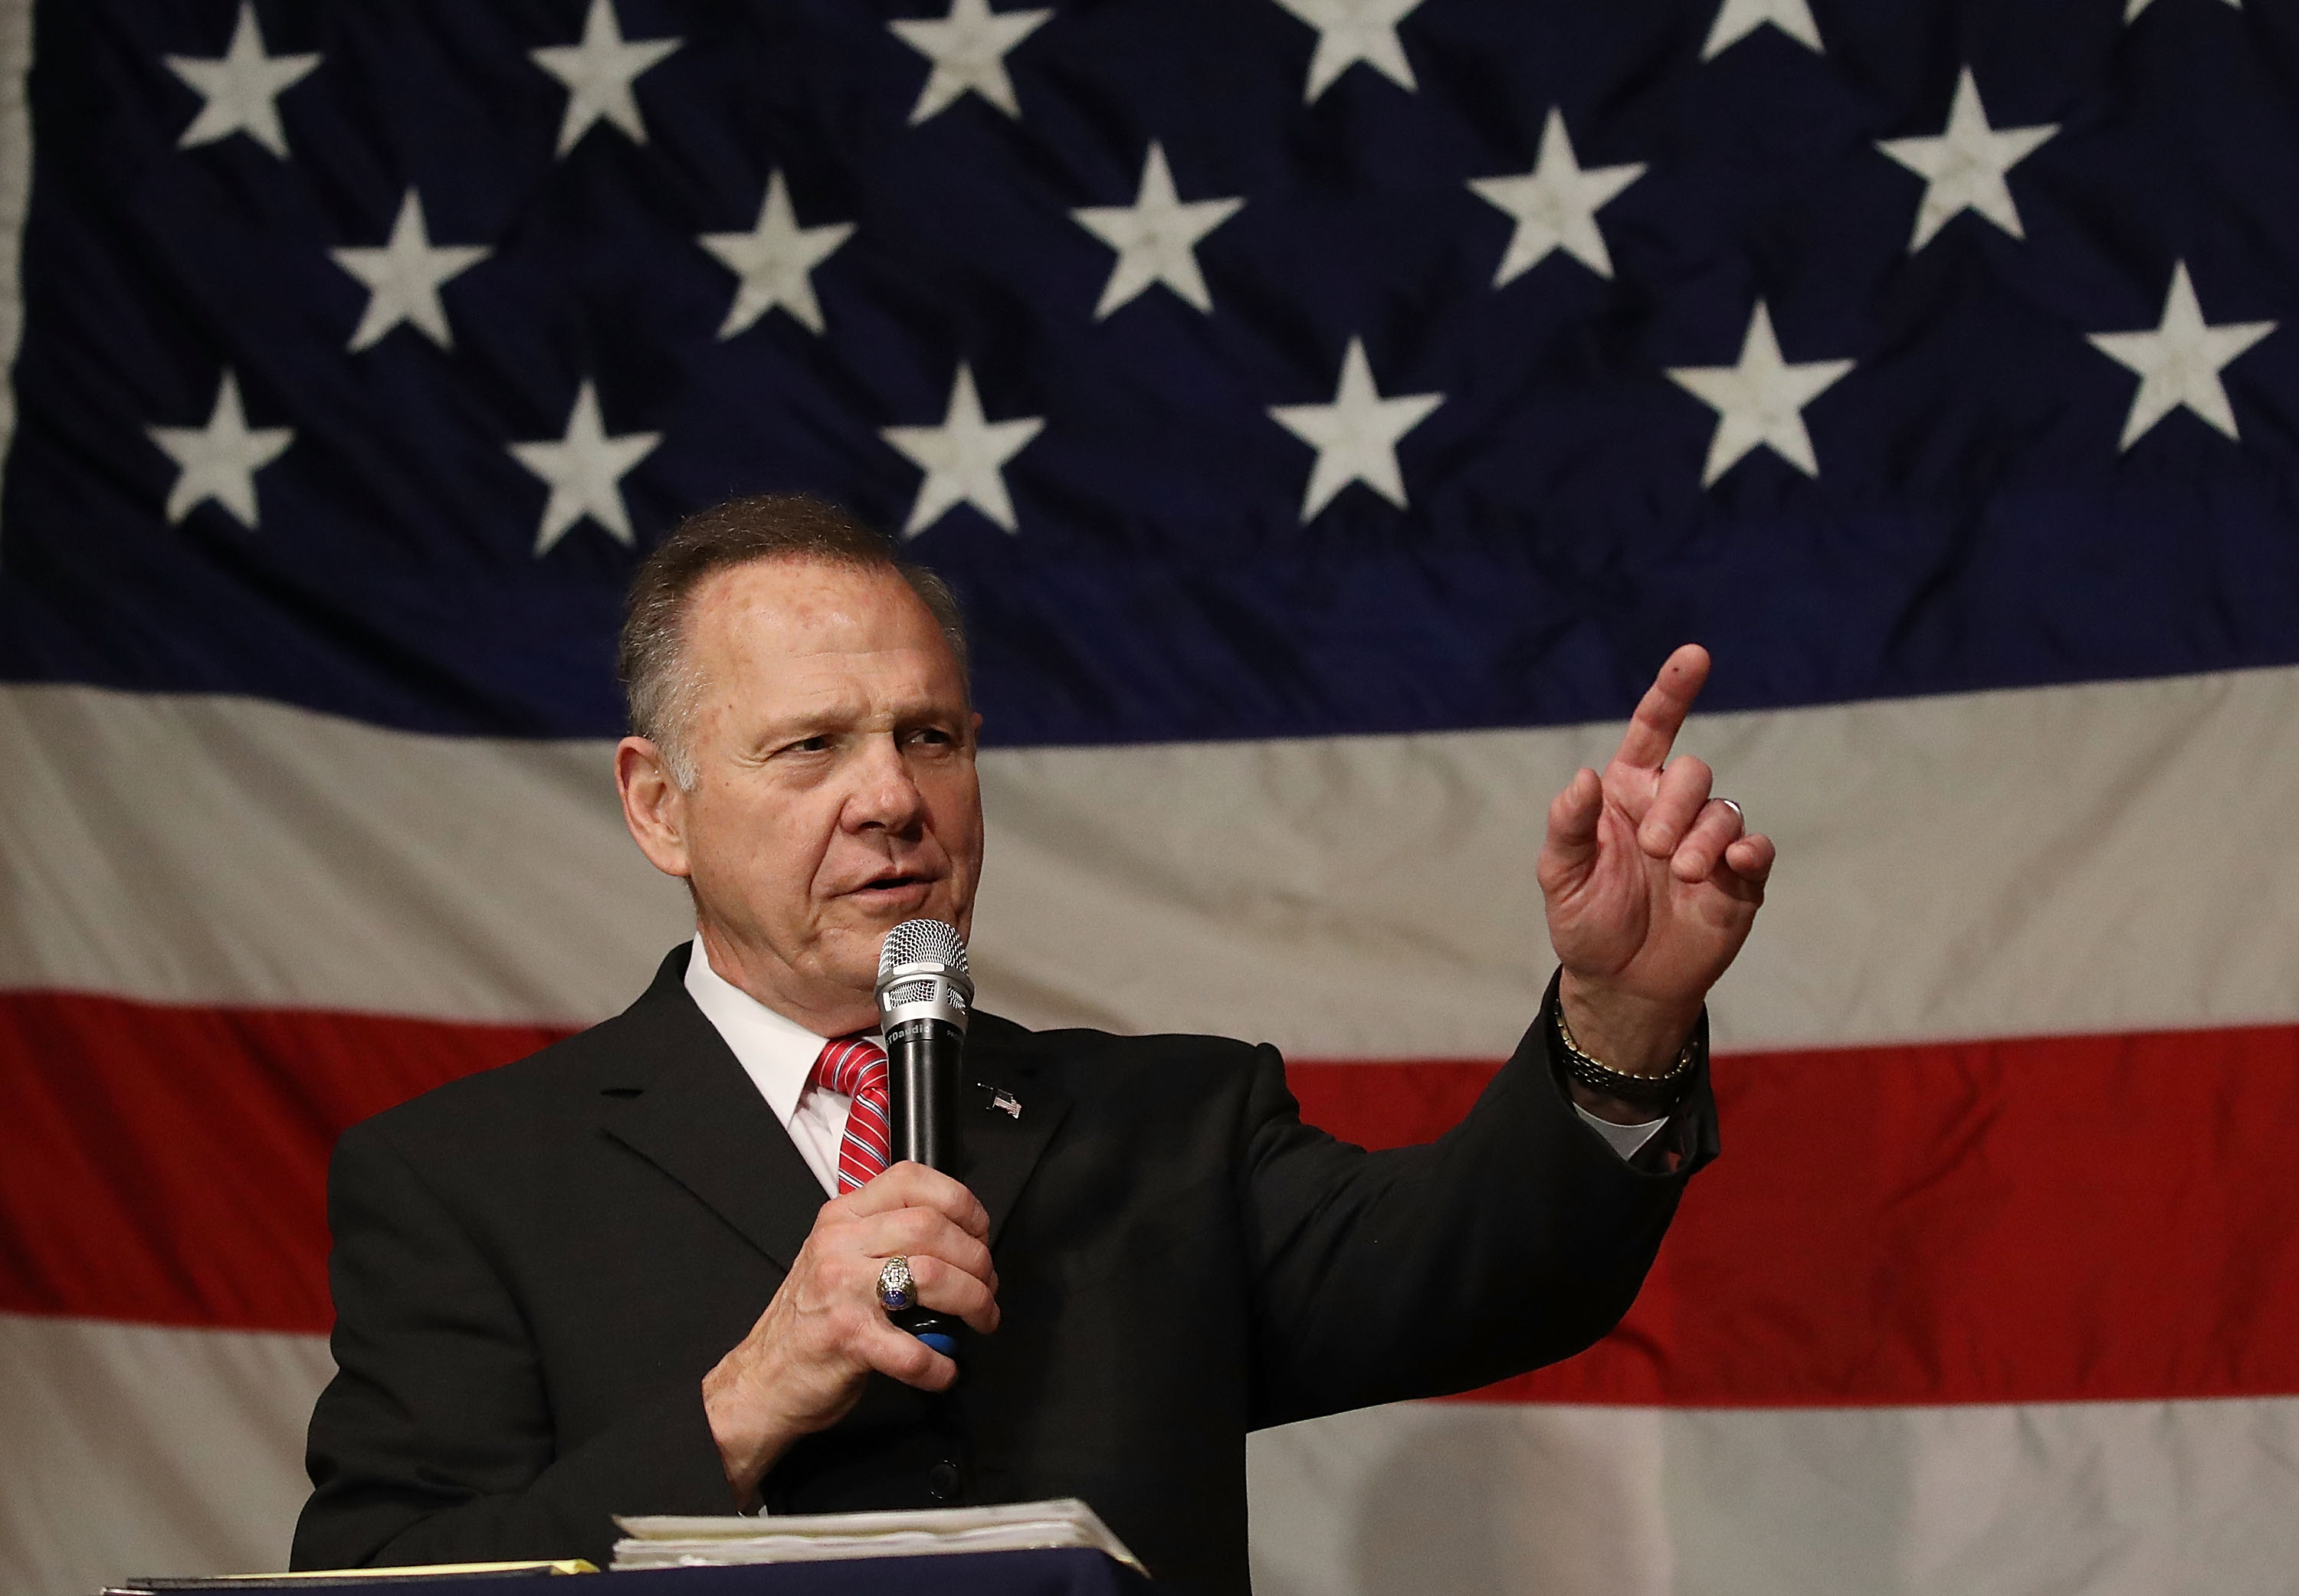 Roy Moore talks at a campaign event before the Alabama Senate election